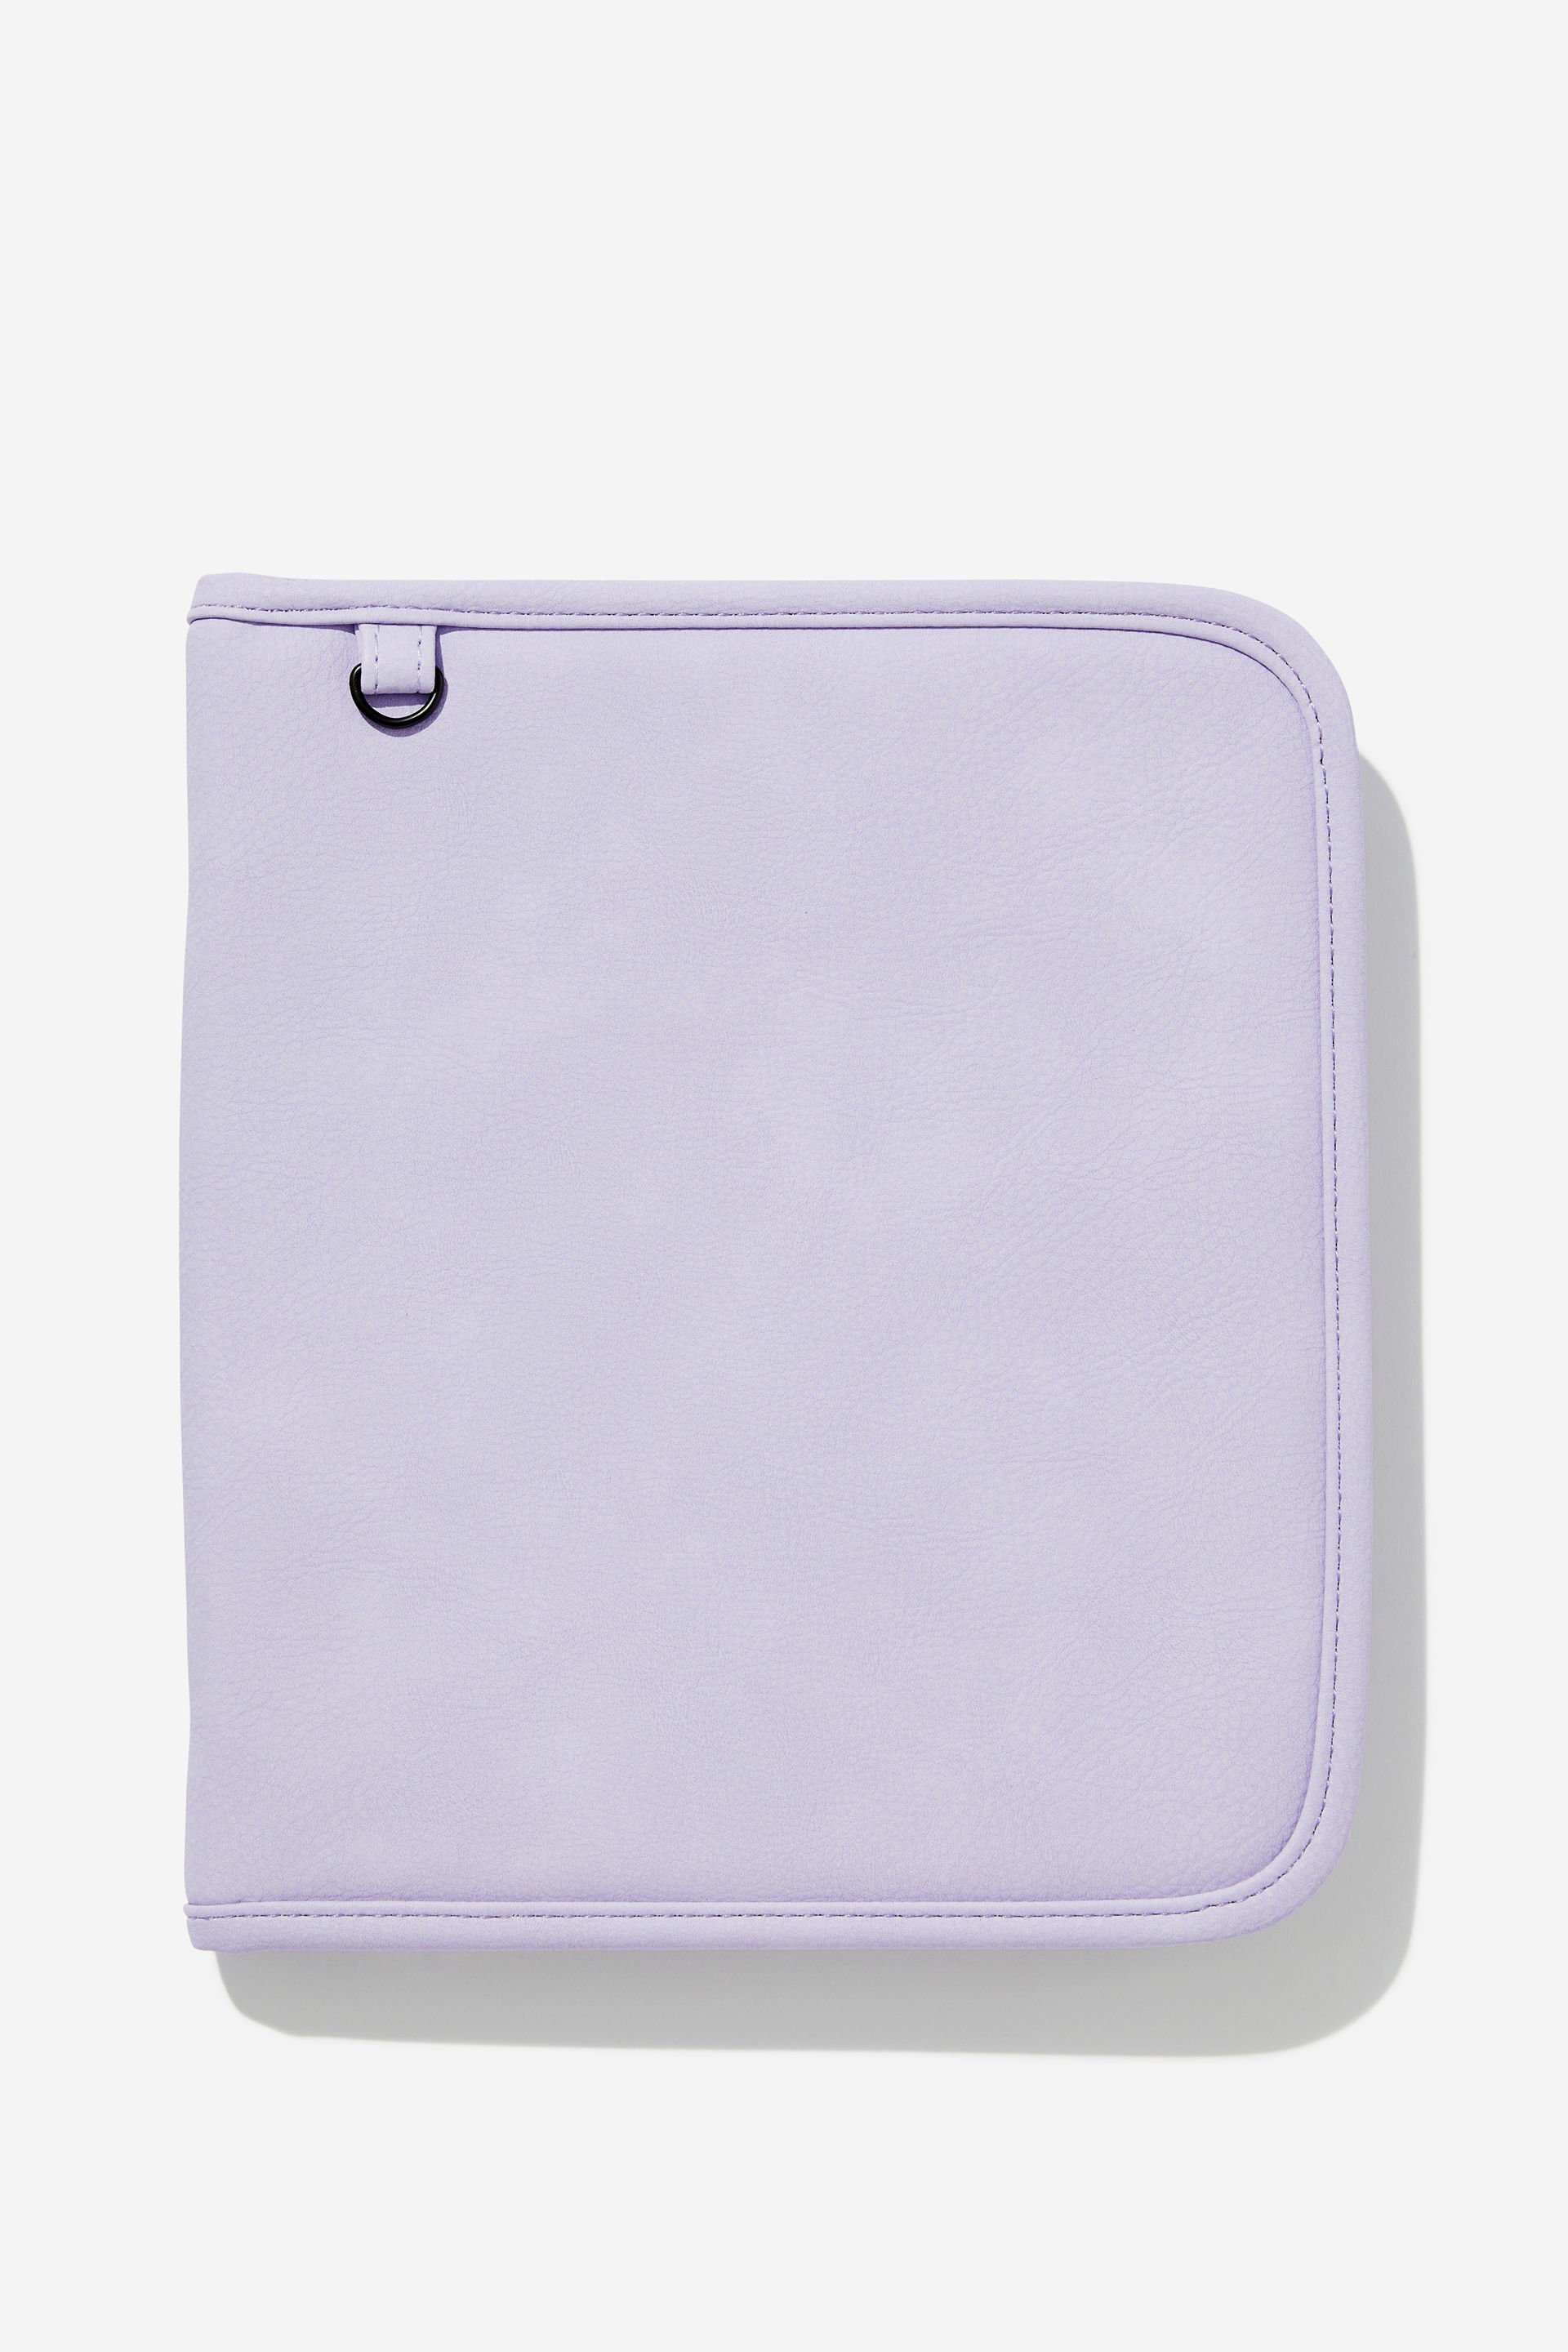 Typo - Ultimate Organiser Pencil Case - Soft lilac